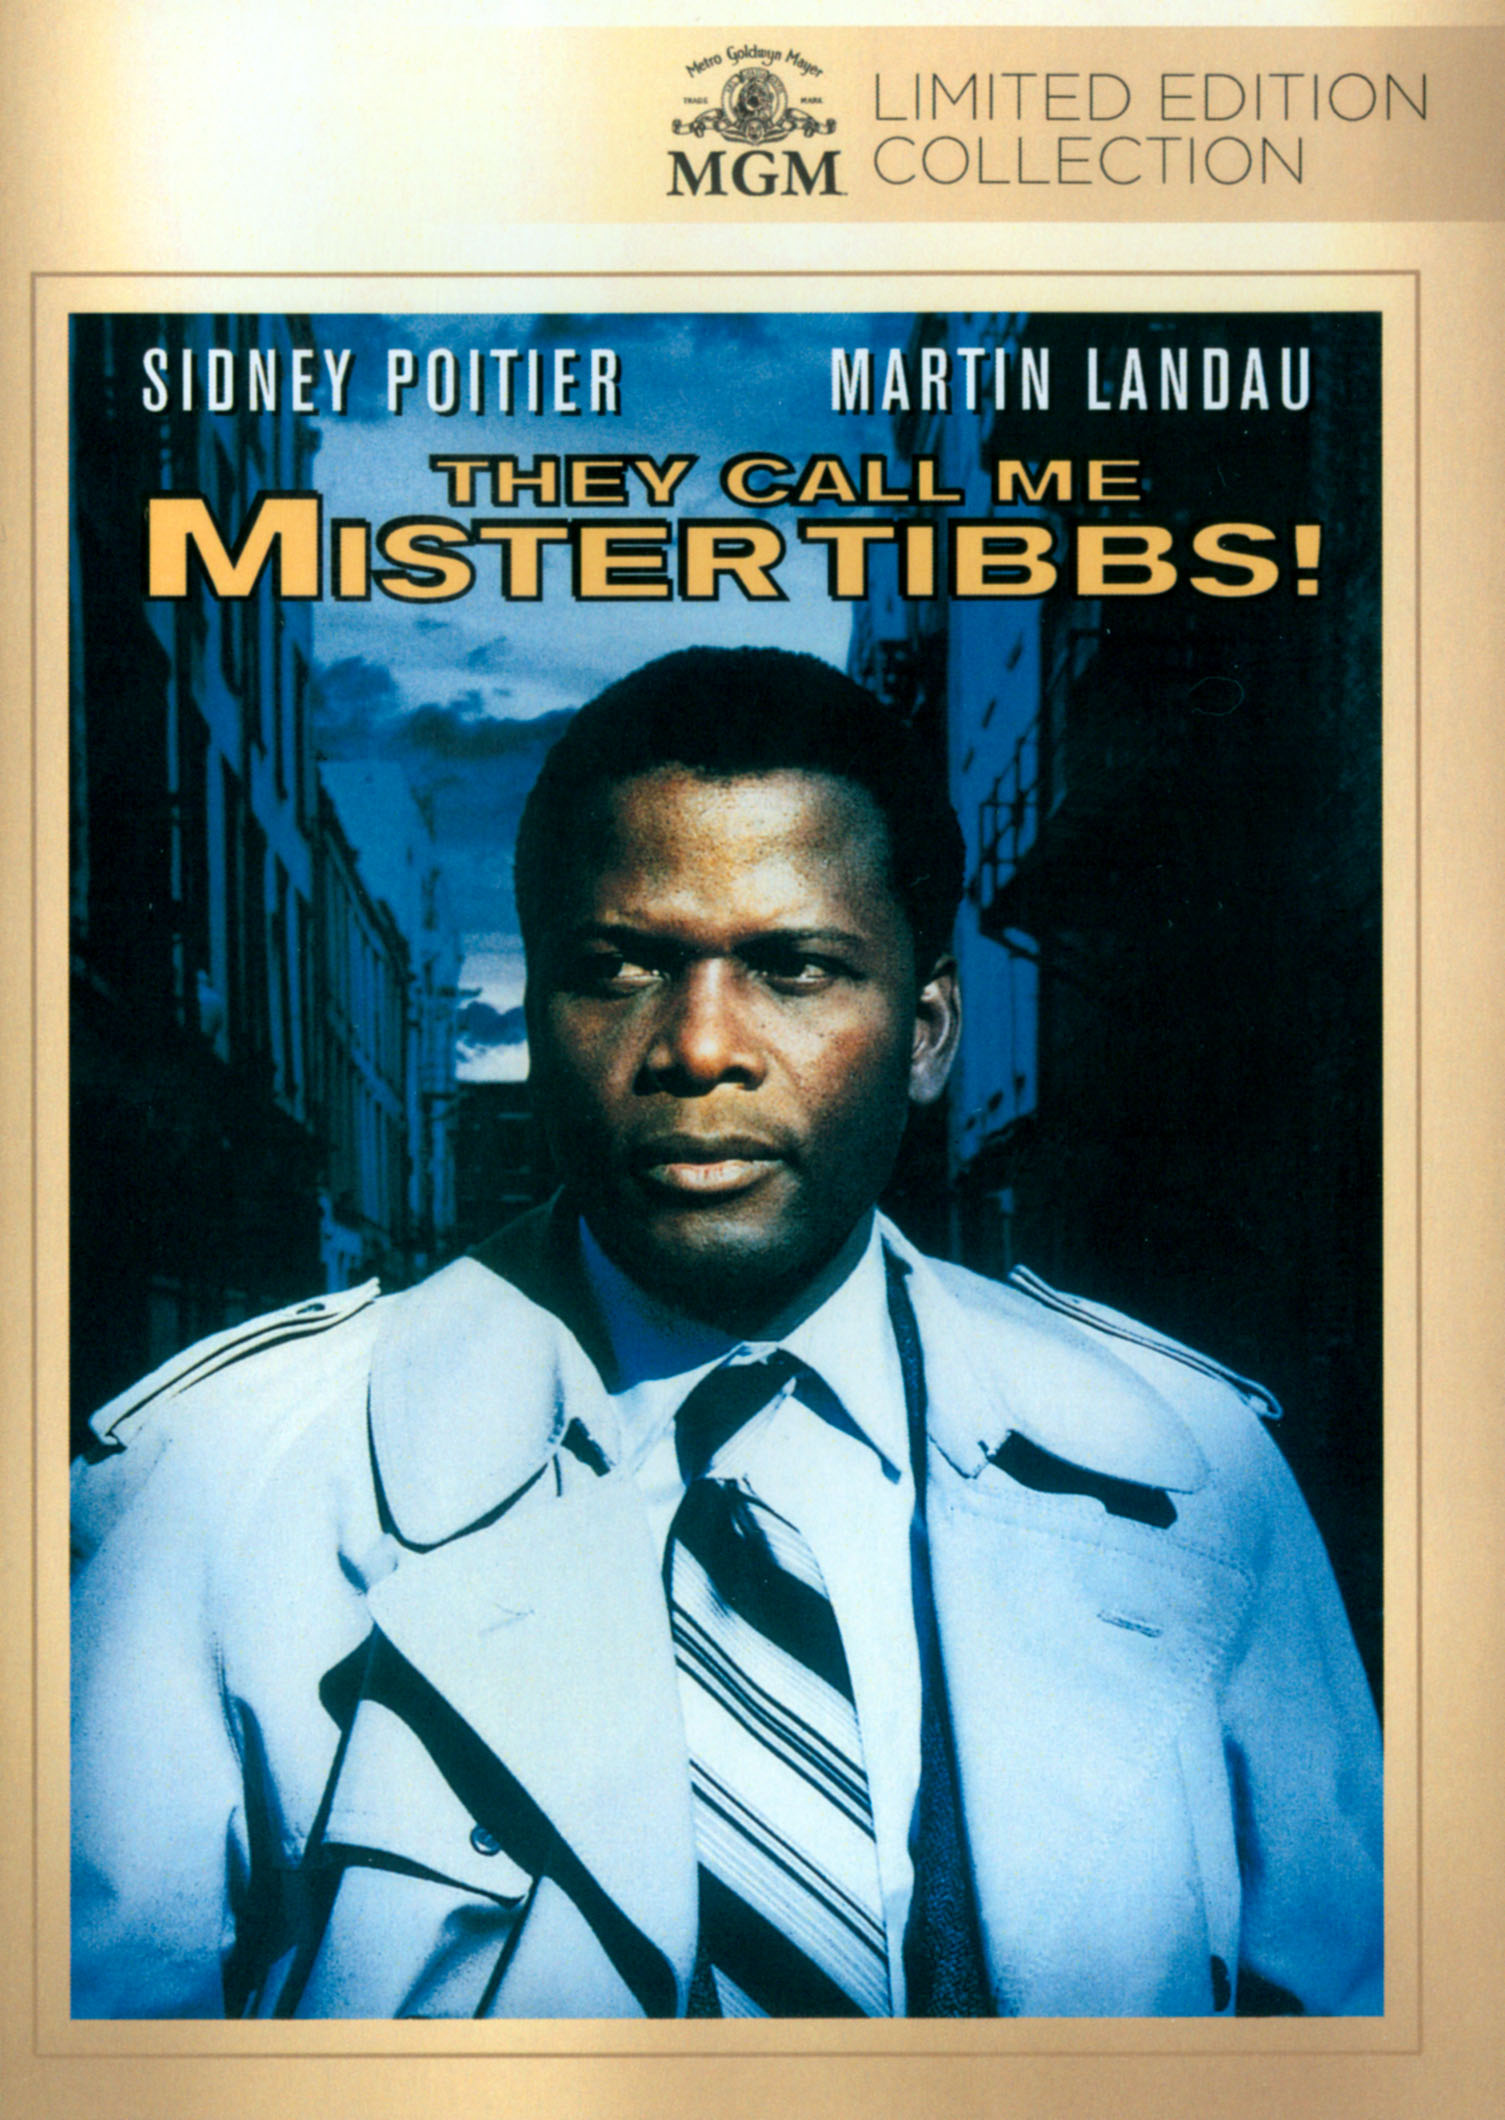 They Call Me Mister Tibbs! [Dvd] [1970] - Best Buy